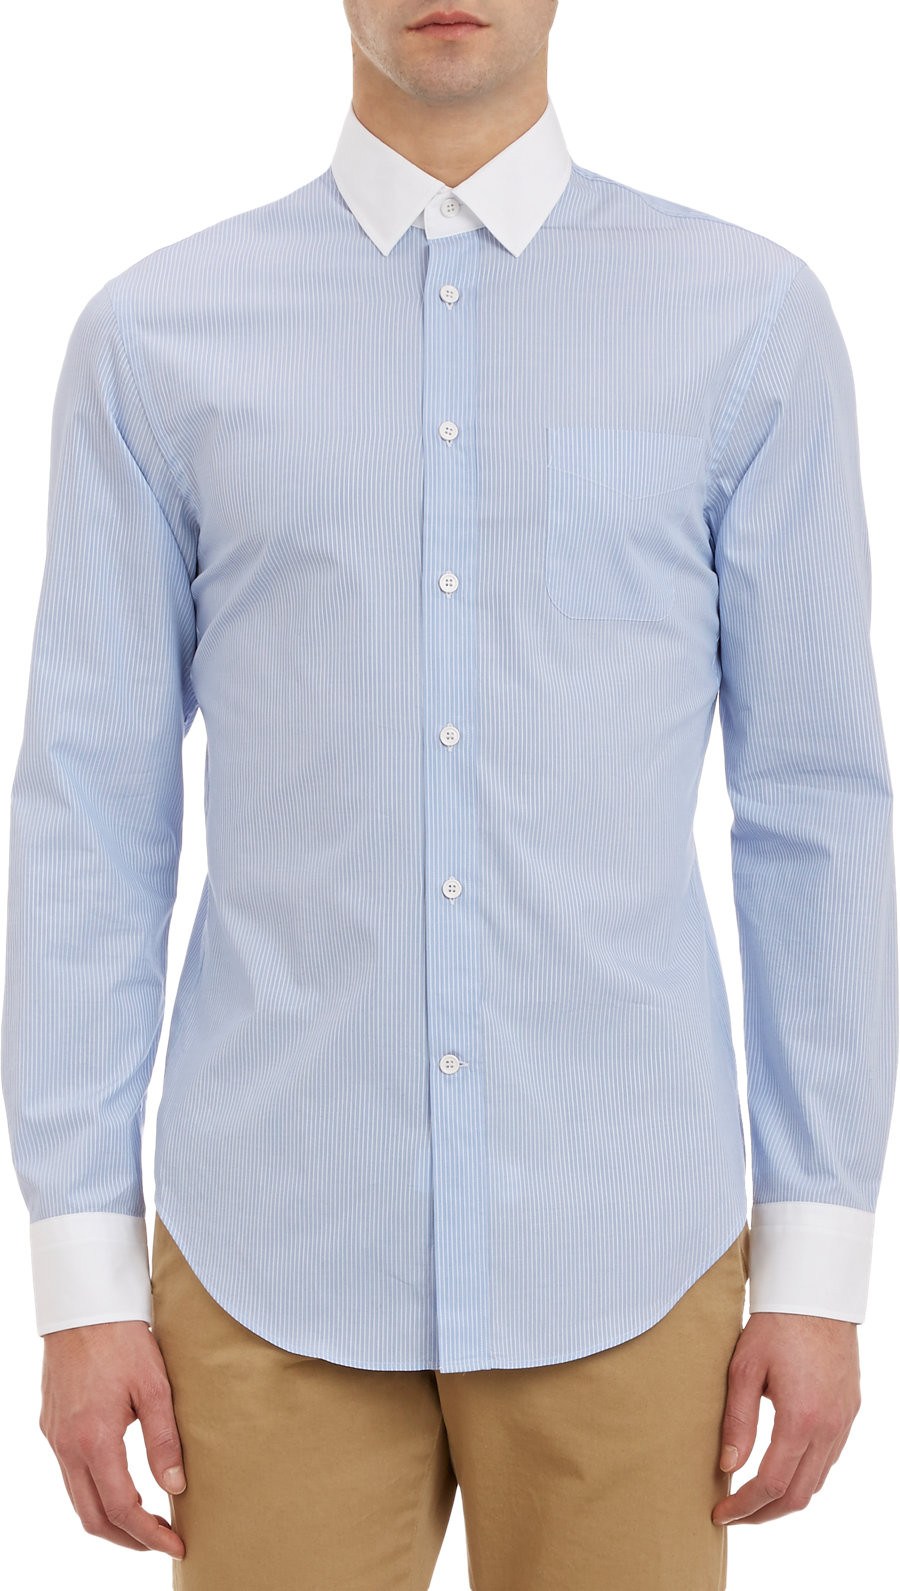 Band of outsiders Pinstripe Dress Shirt in Blue for Men | Lyst